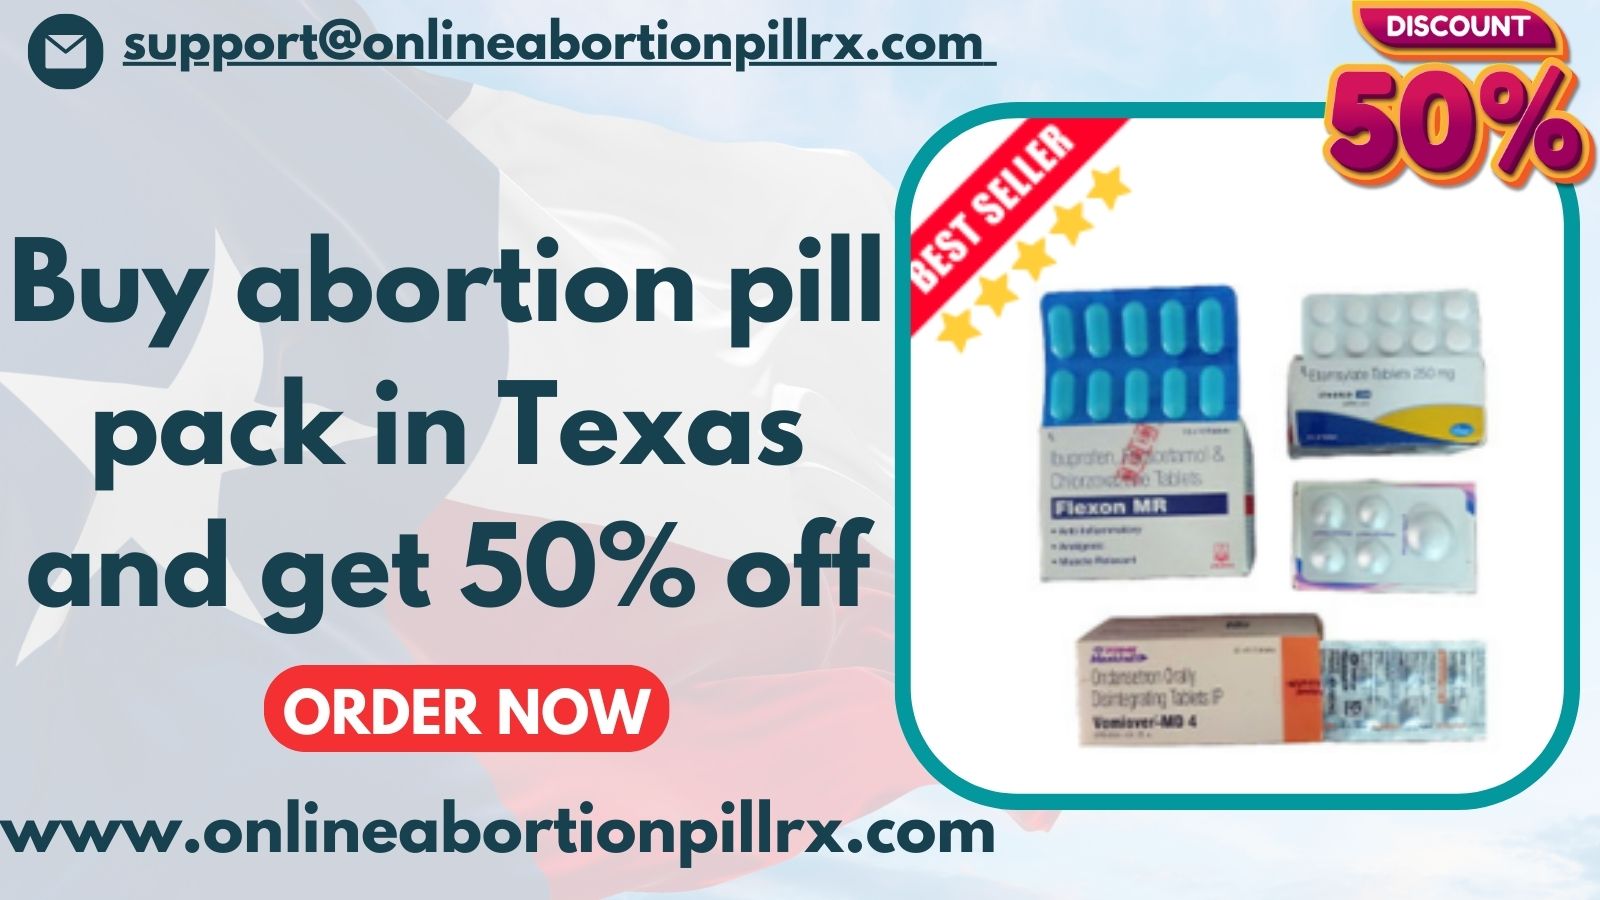 Buy abortion pill pack in Texas and get 50 off   - Texas - Dallas ID1533445